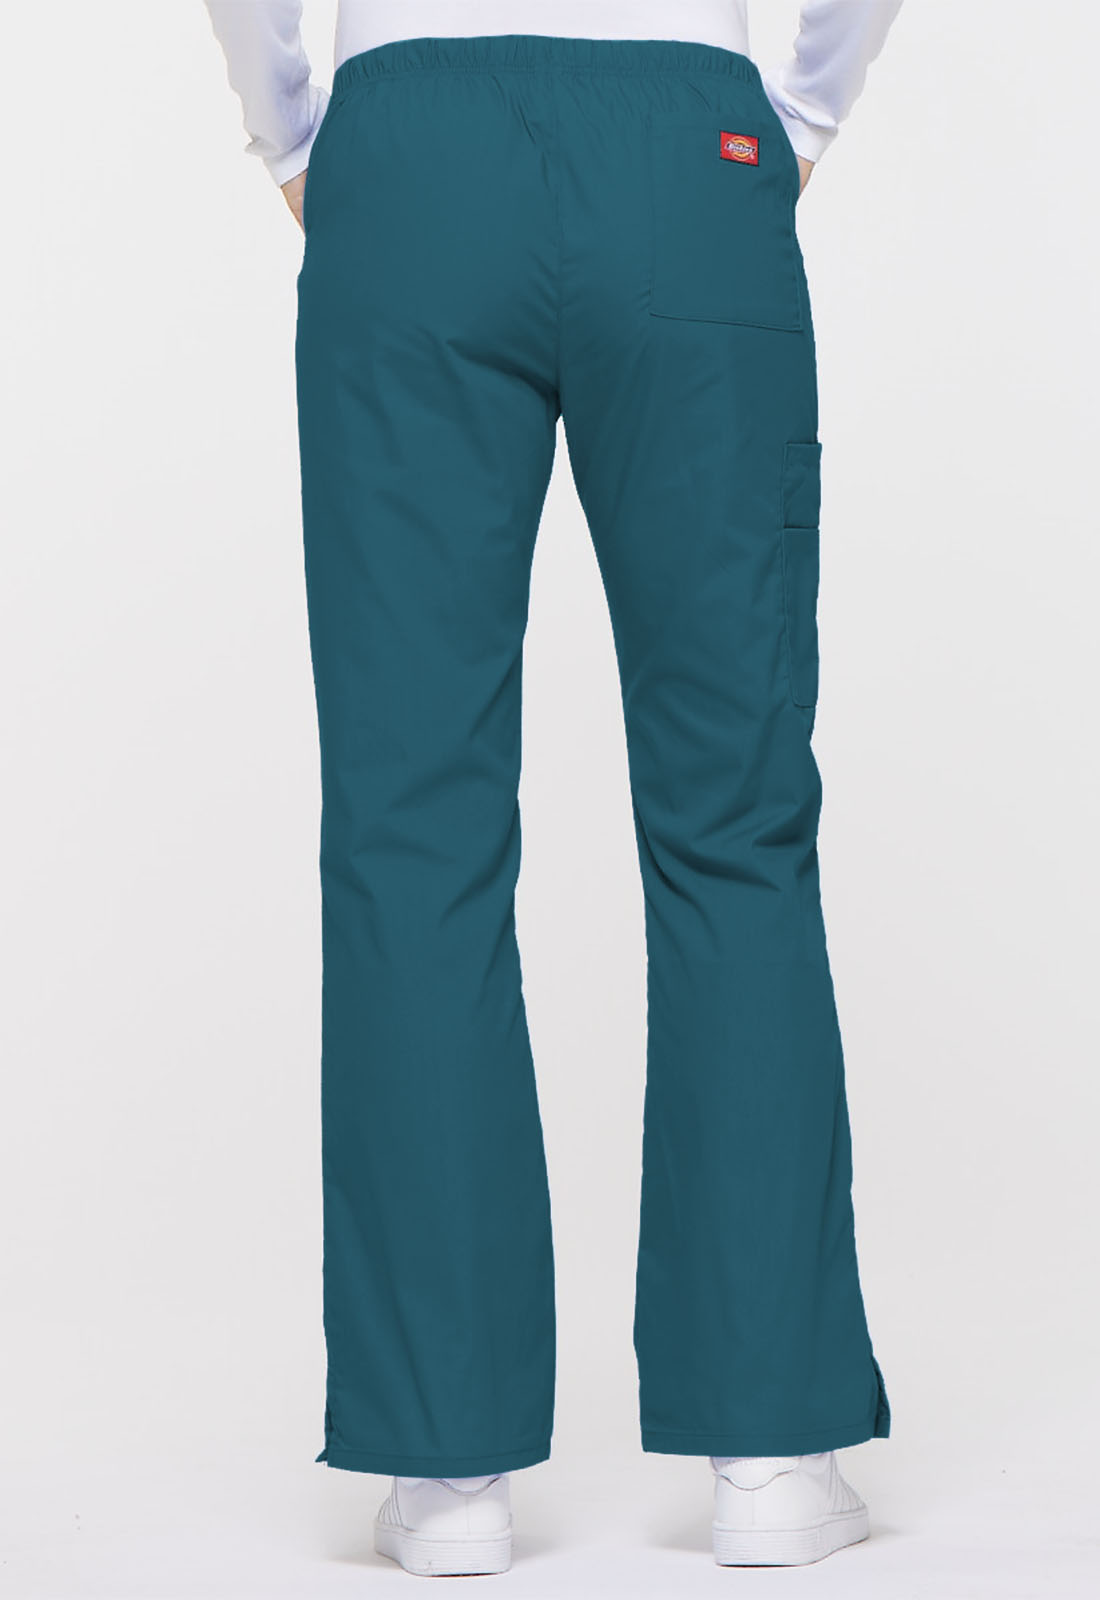 Dickies Women's Cargo Scrub Pants, Mid Rise with Drawstring - 86206 - image 3 of 7